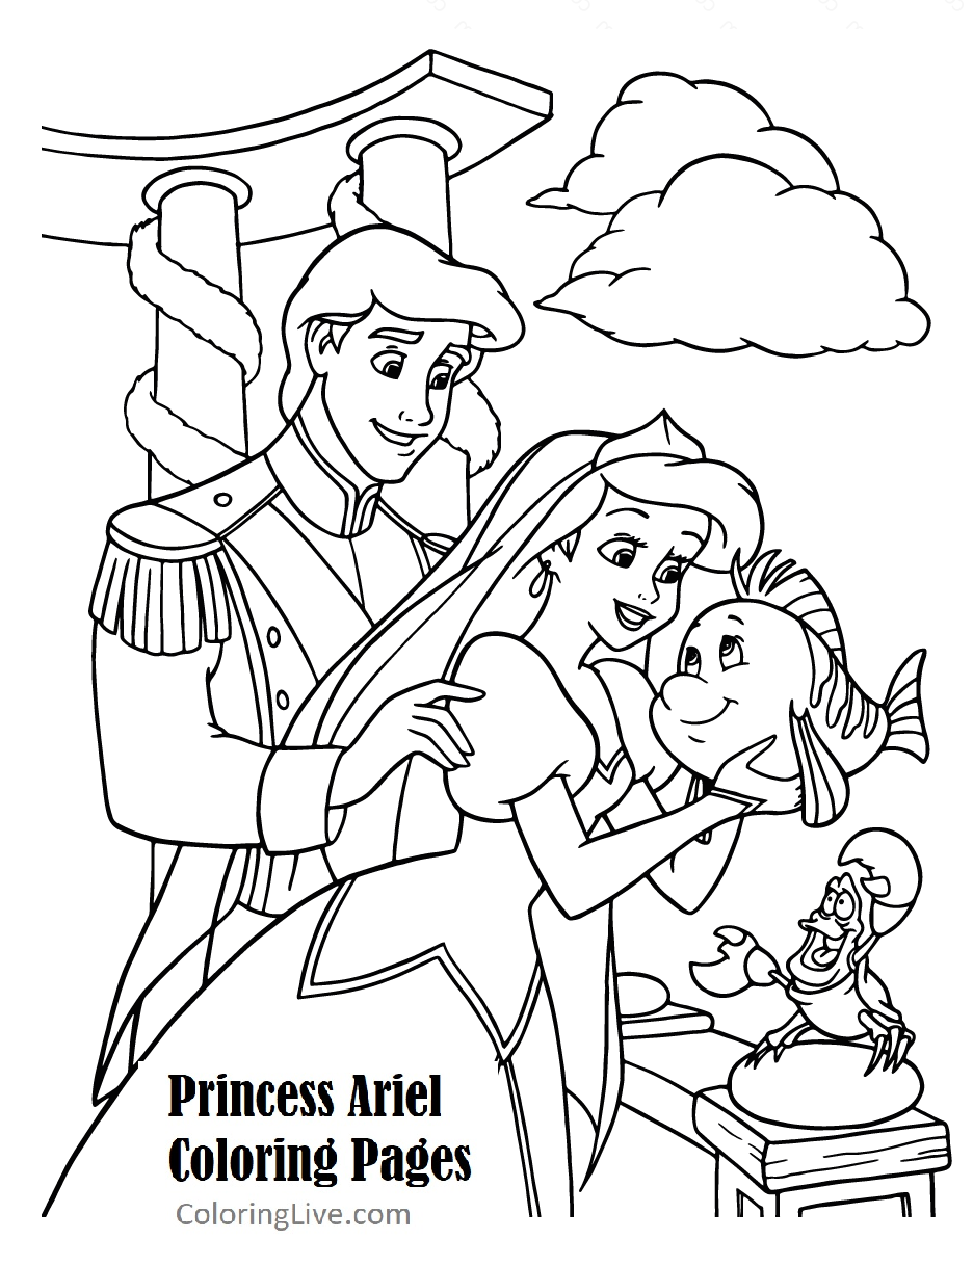 Princess Ariel (the Little Mermaid) Coloring Pages for Kids (Printable ...